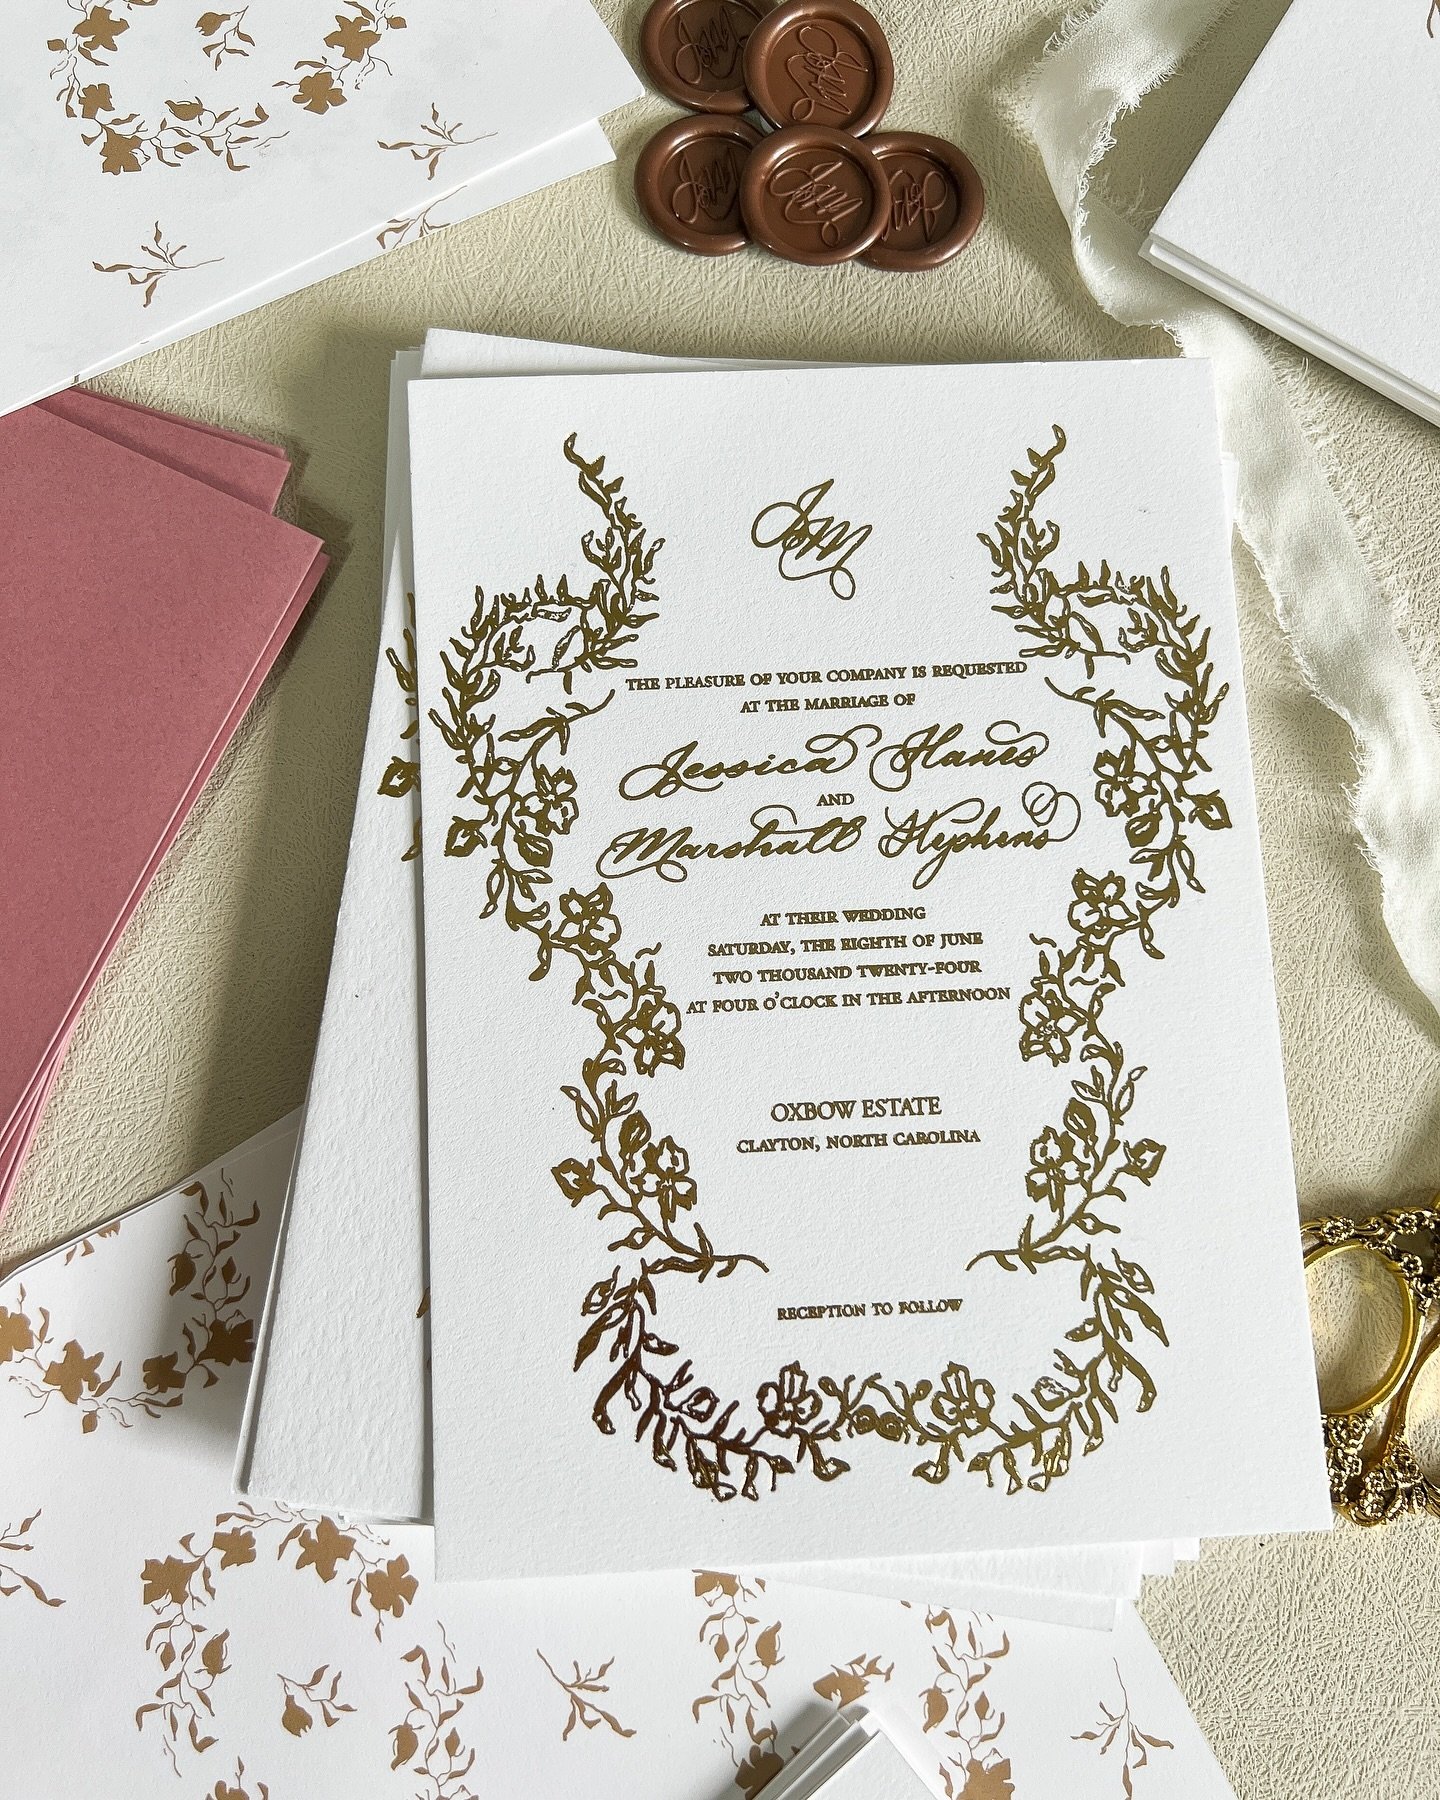 Your invitation is designed custom for you! Your stationery experience begins with me here:

Step 1: The Consultation
The invitation experience begins with a consultation to discuss your event vision and the type of invitation you would like.

Step 2